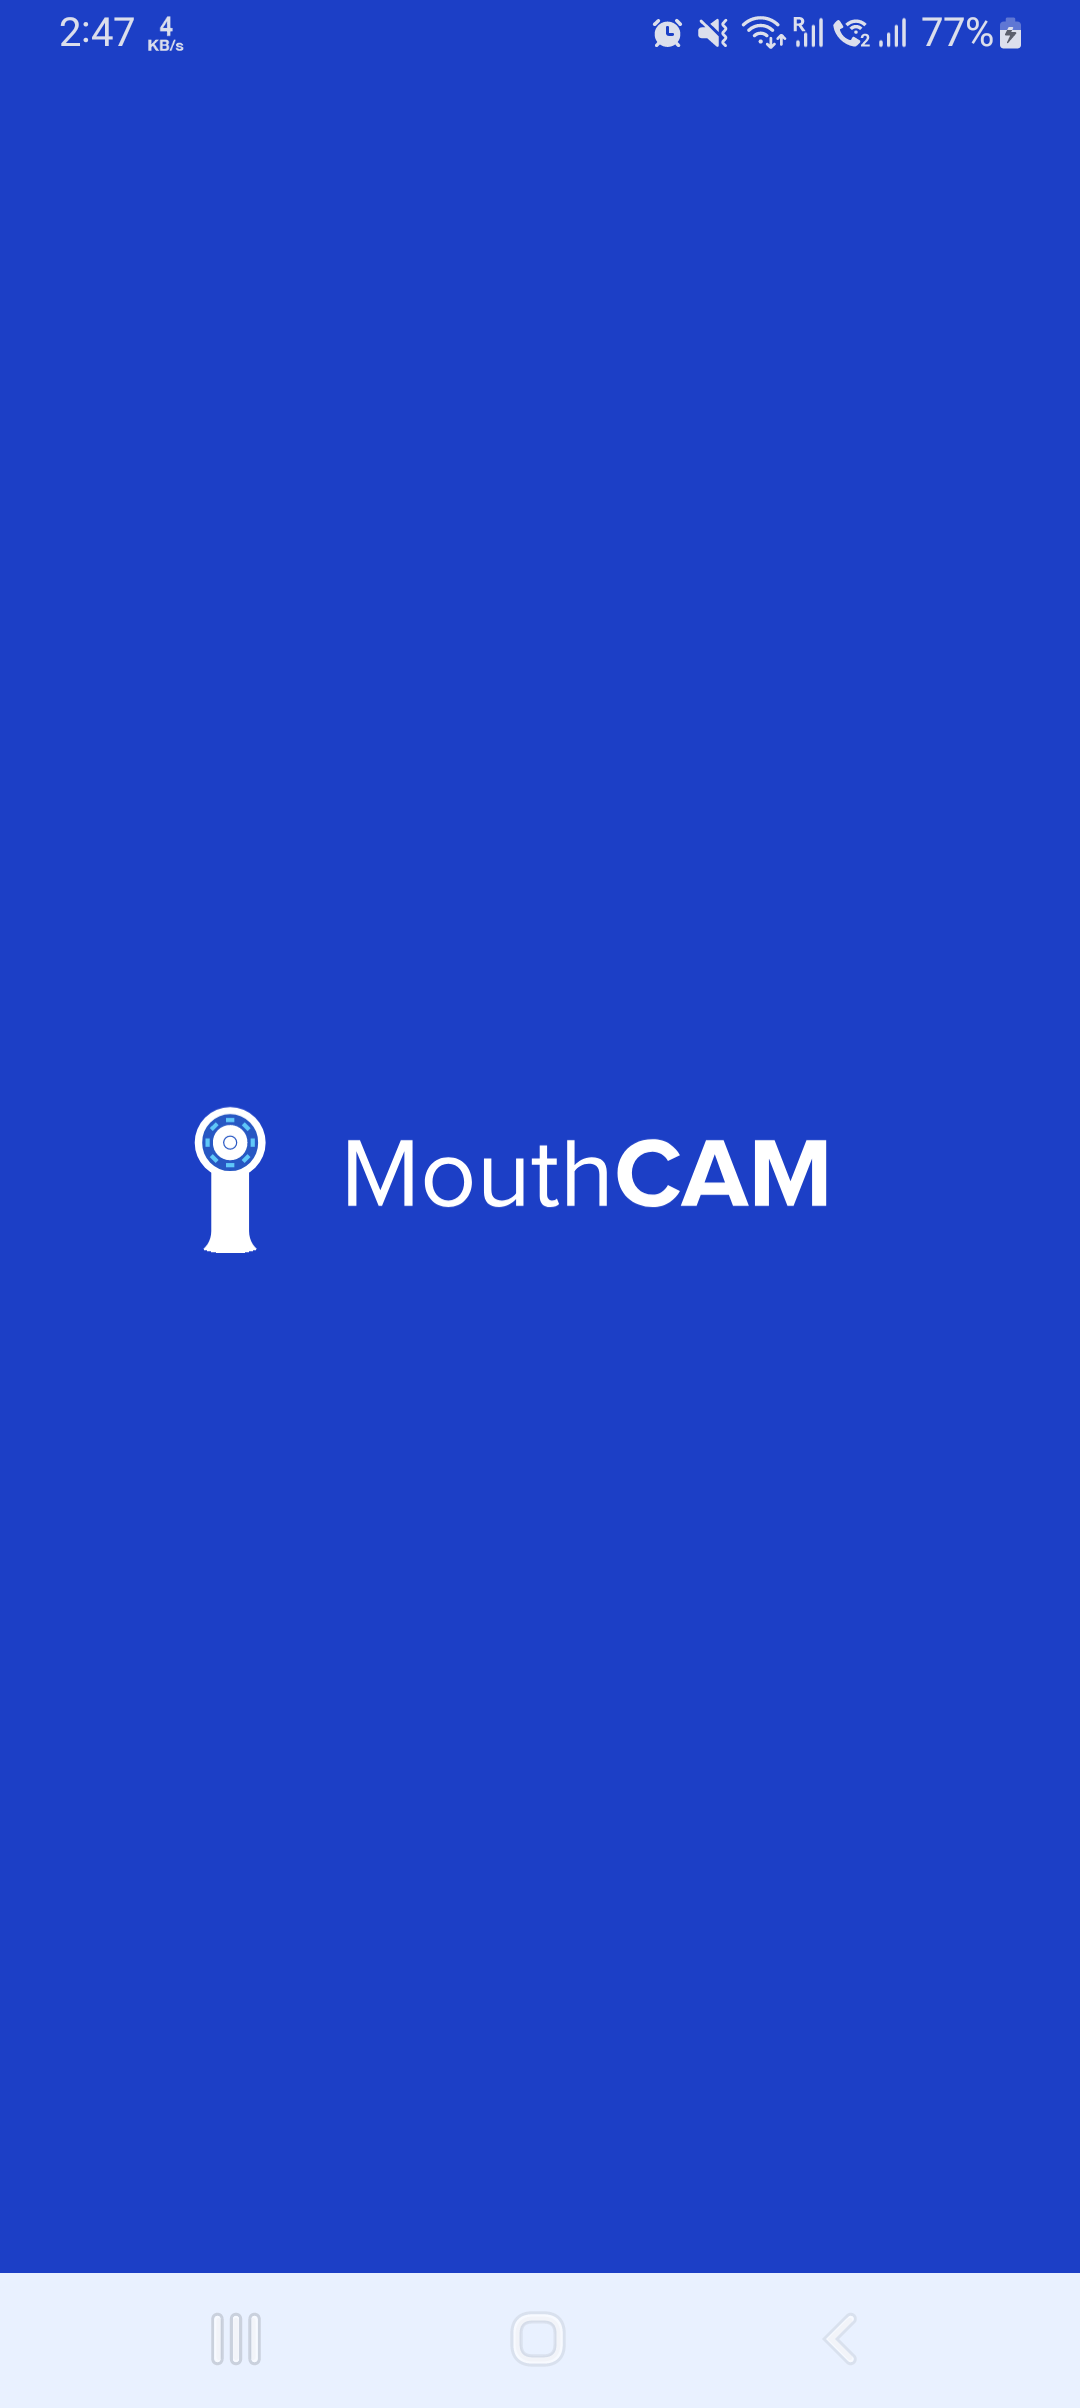 mouthcam instructions